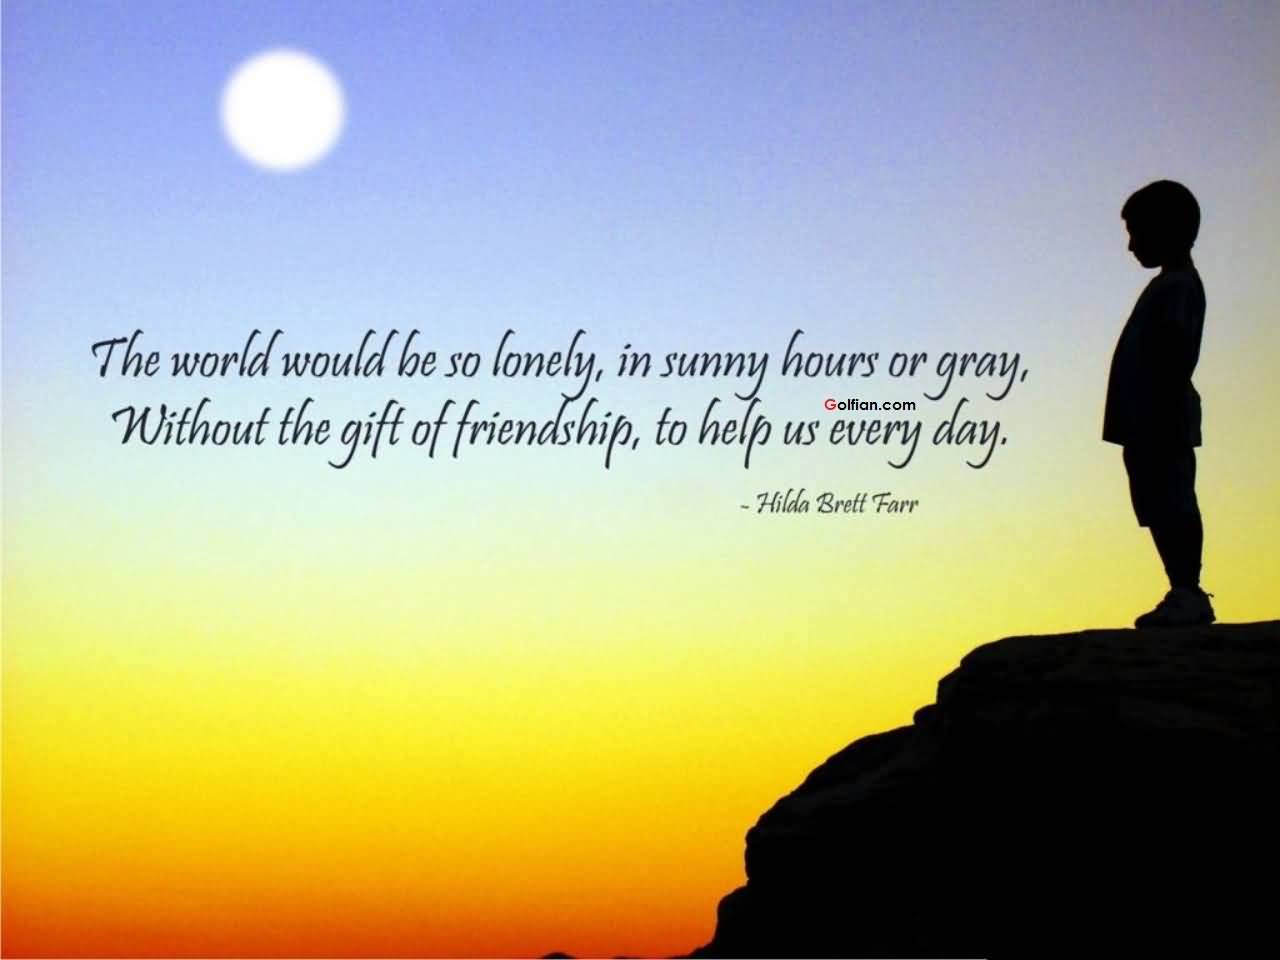 The world would be so lonely, in sunny hours or gray, without the gift of friendship, to help us every day. Hilda Brett Farr